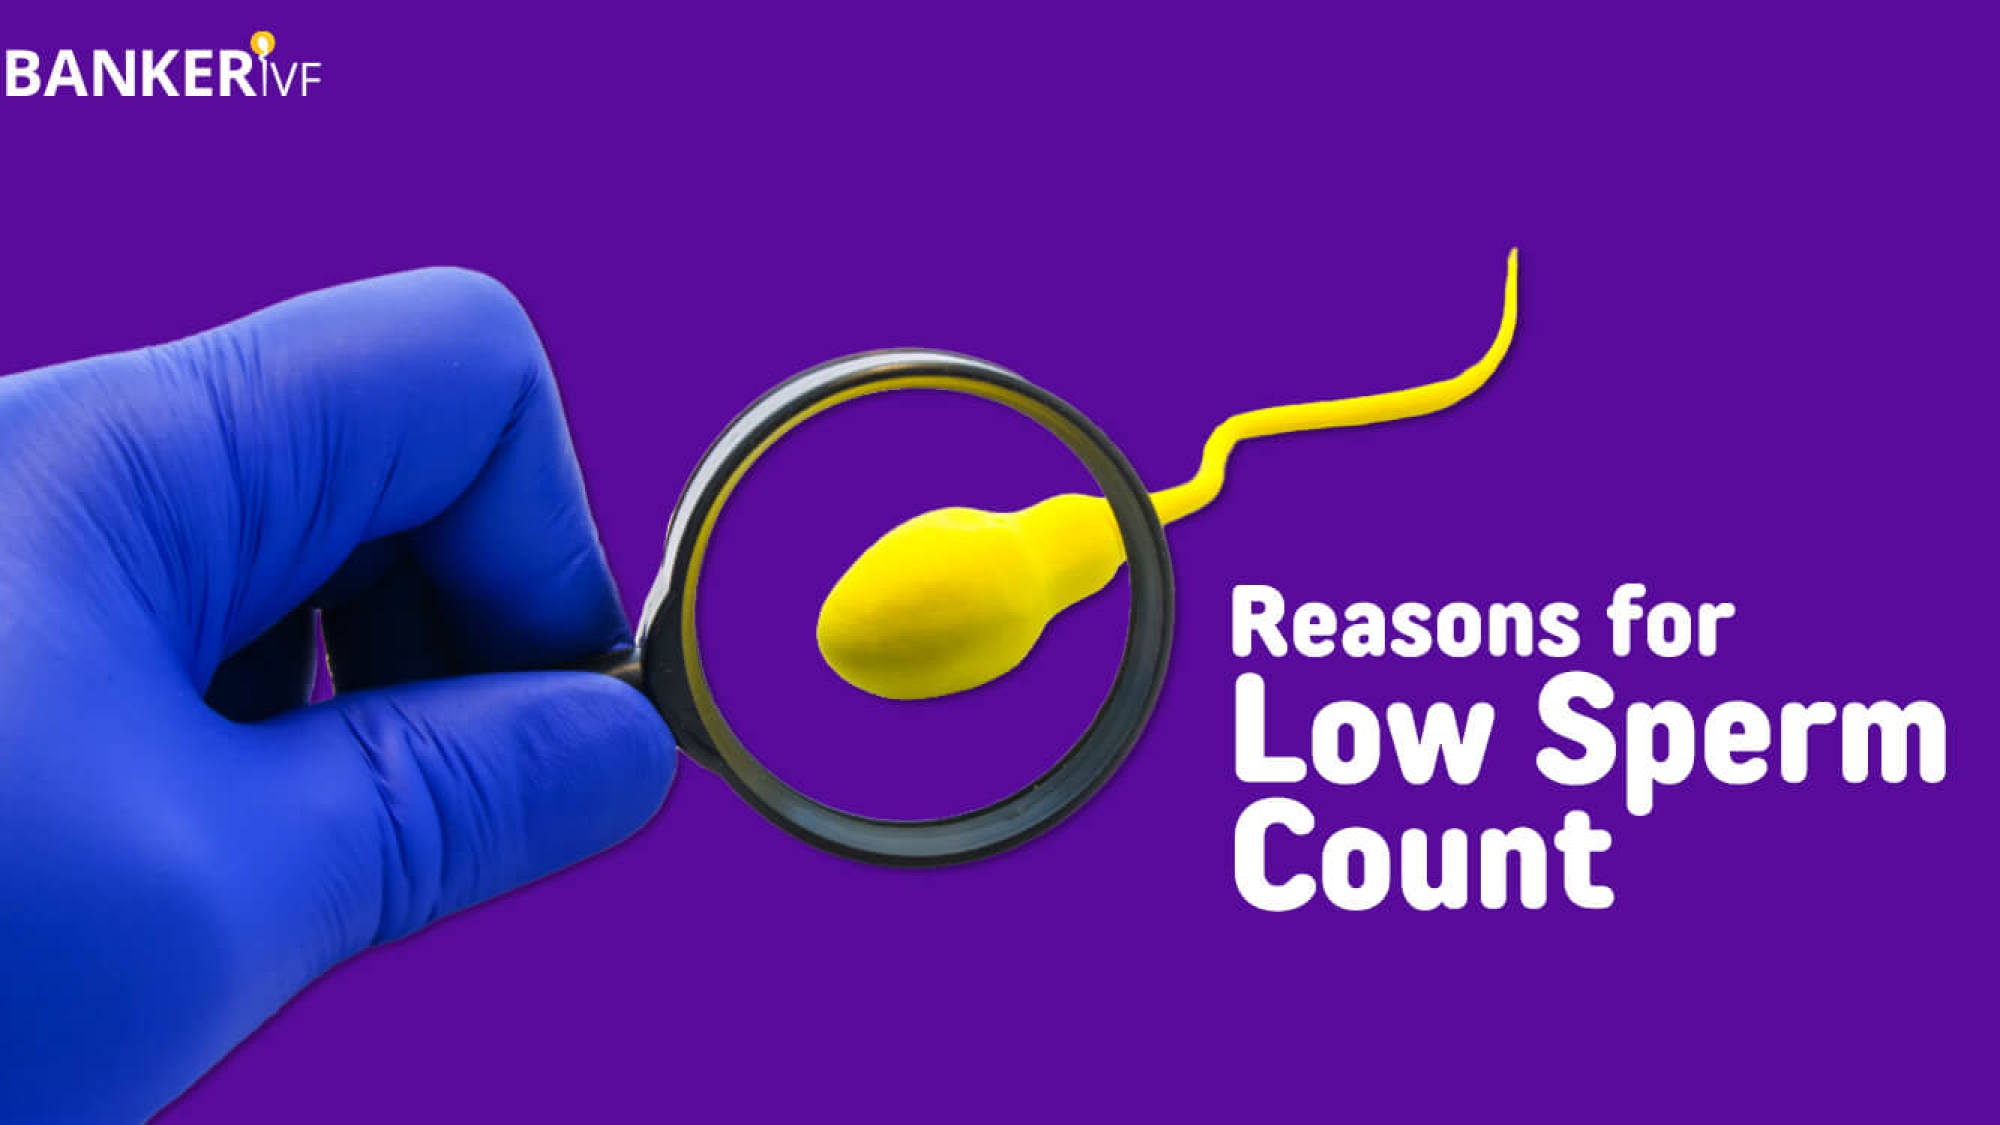 Reasons-for-Low-Sperm-Count-Male-Infertility-Banker-IVF-02